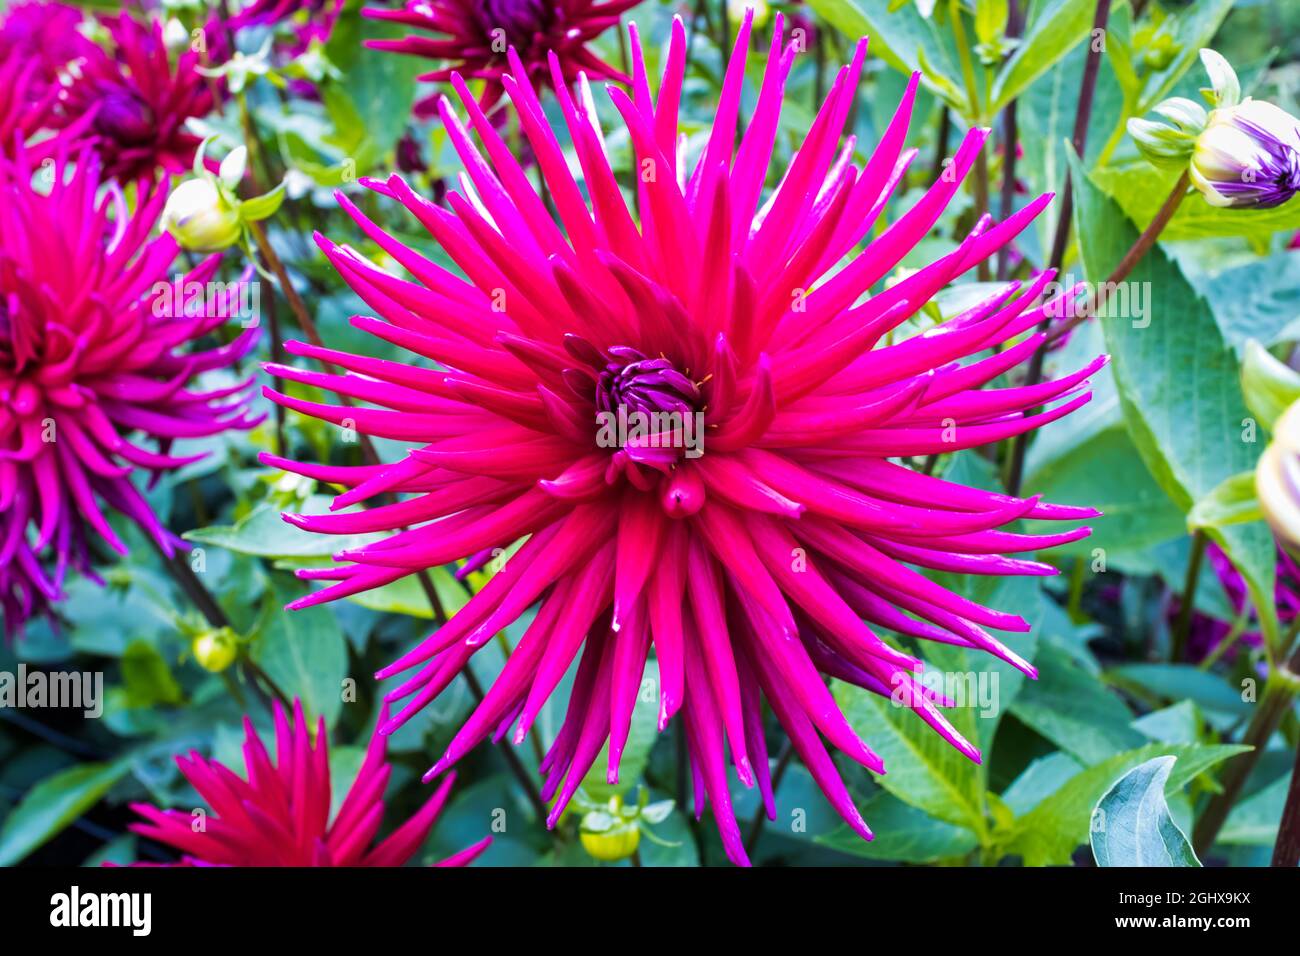 Large head of deep pink cactus dahlia flower in a garden close-up. Stock Photo